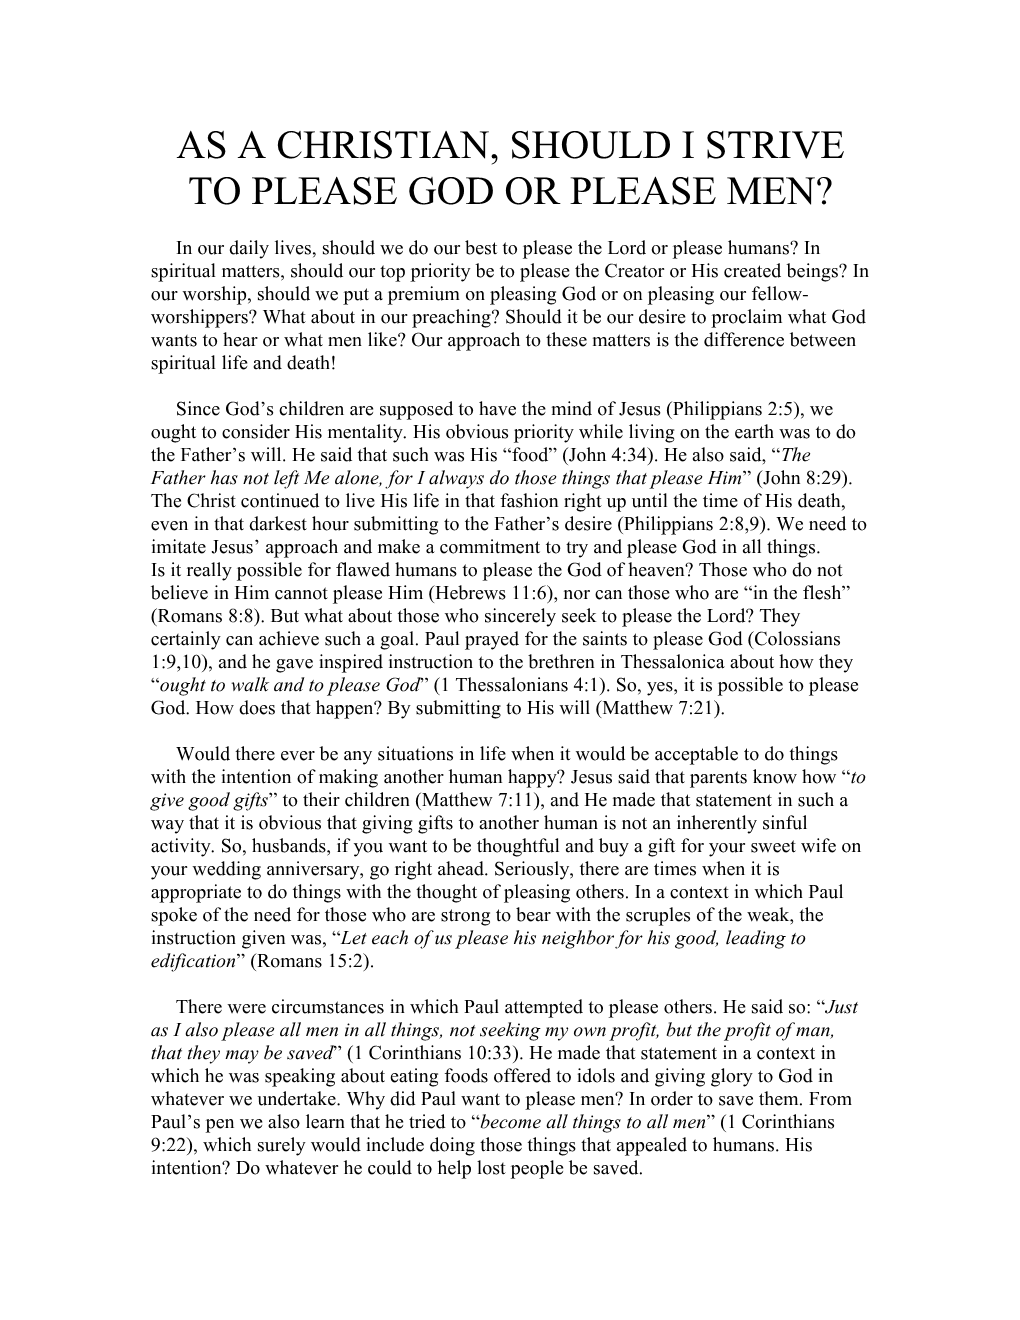 As a Christian, Should I Strive to Please God Or Please Men